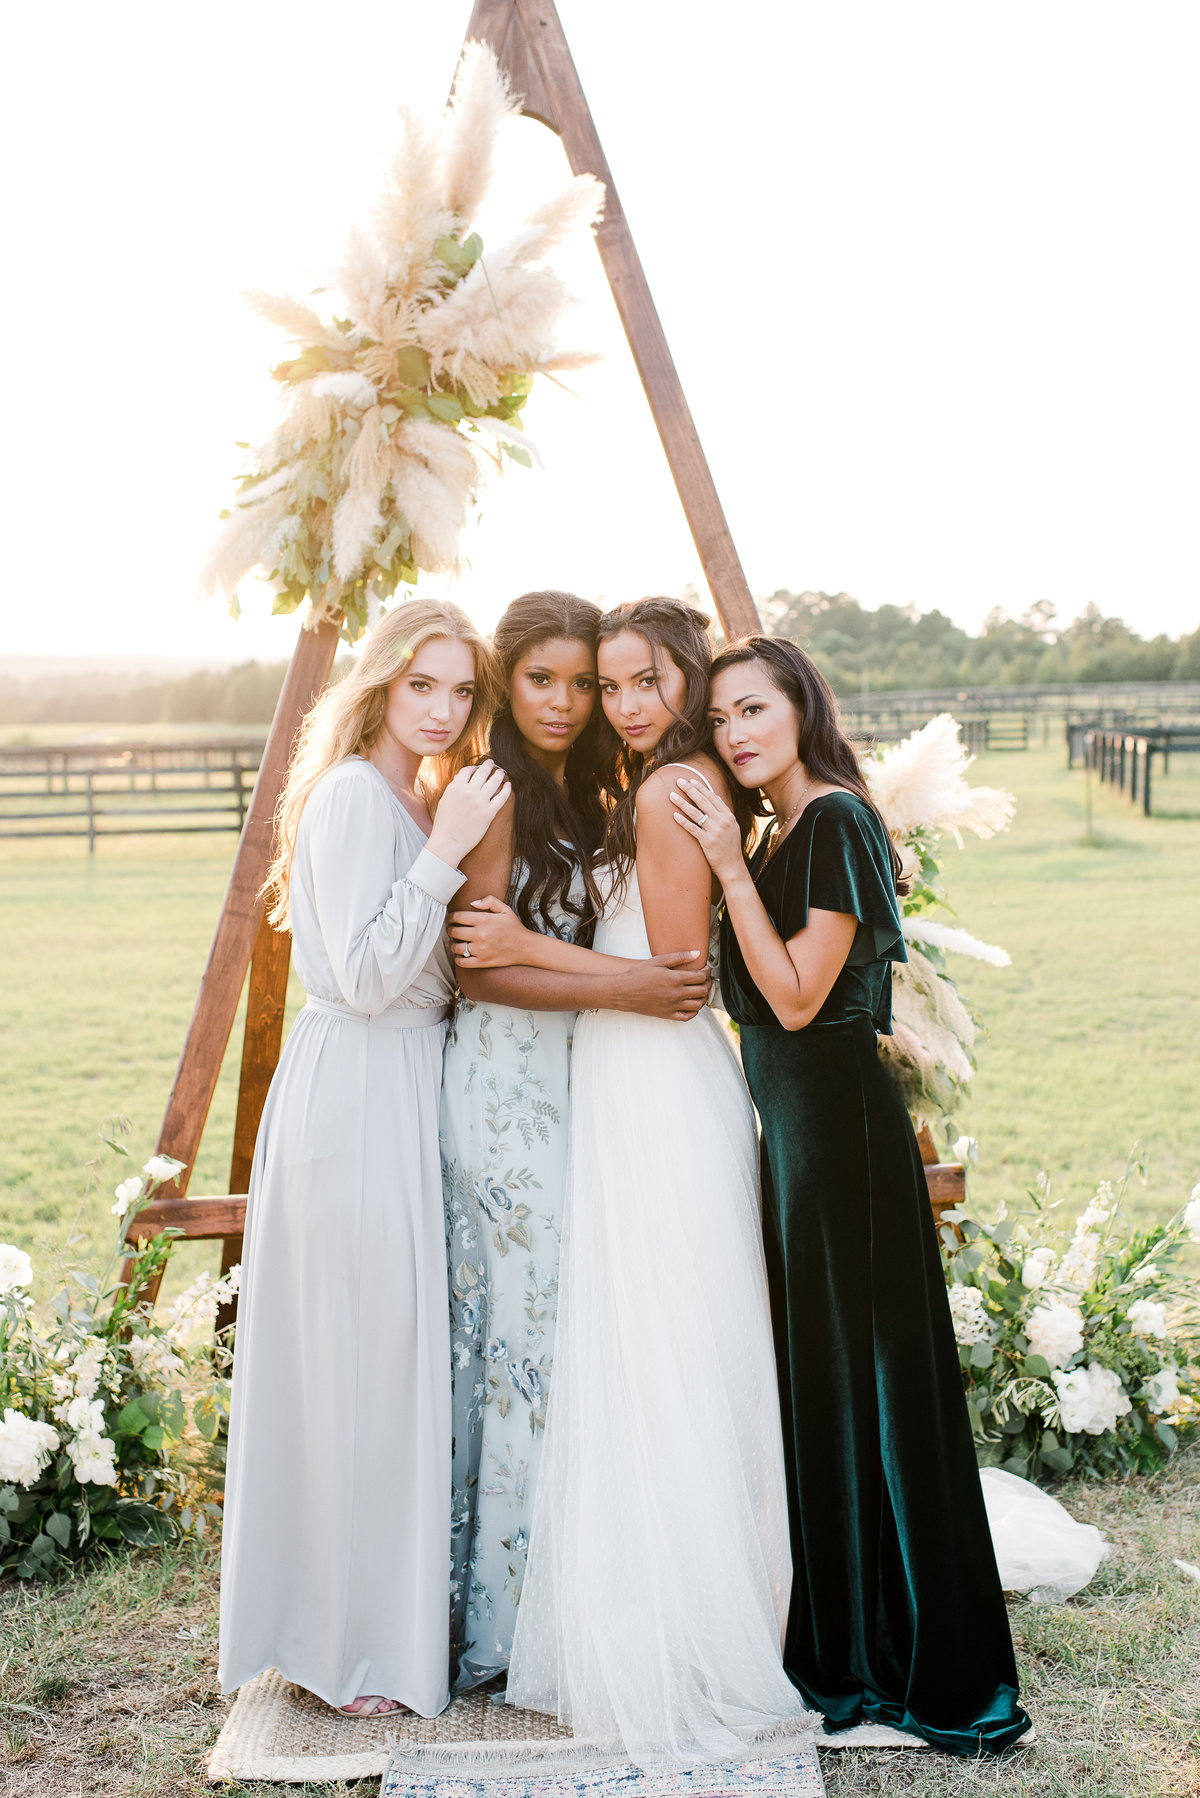 Stable View Wedding Photographer - Bride and Bridesmaids